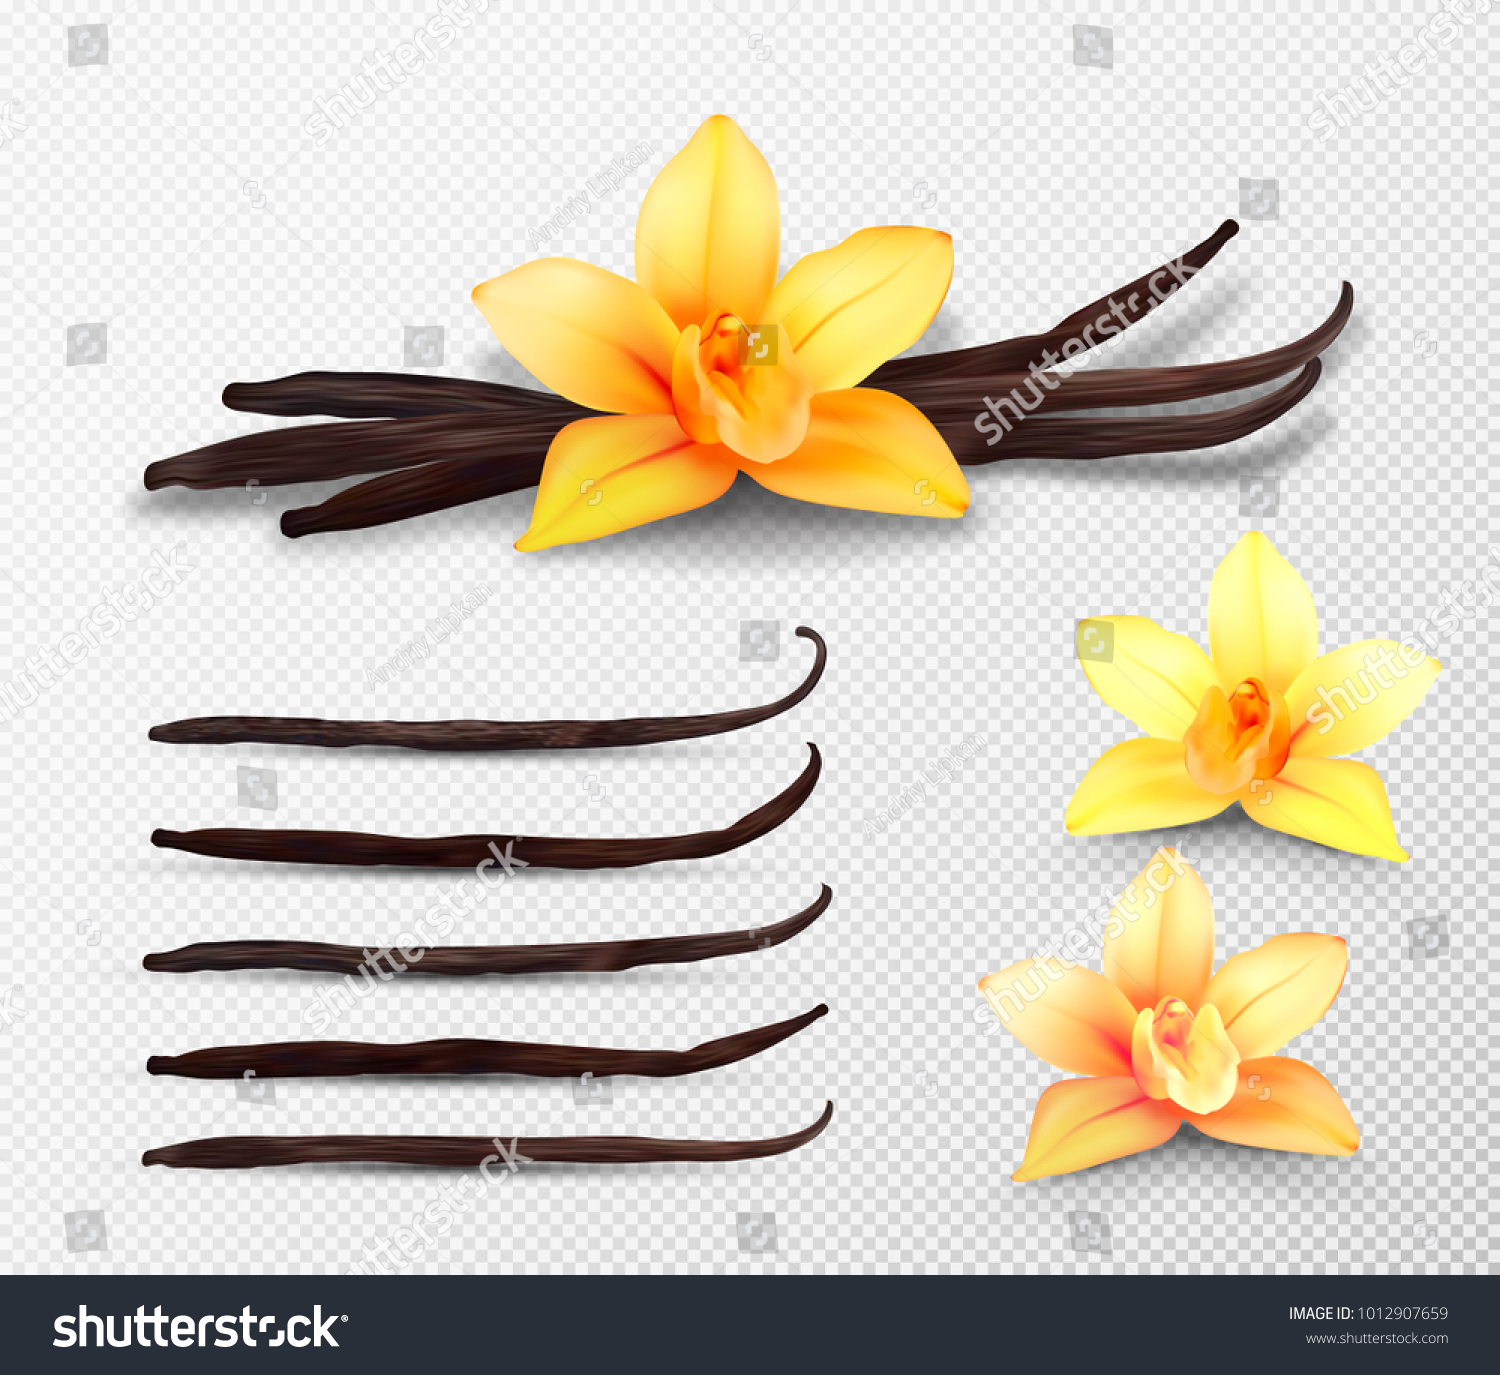 Realistic vector set of isolated elements. Vanilla flowers and pods or sticks #1012907659